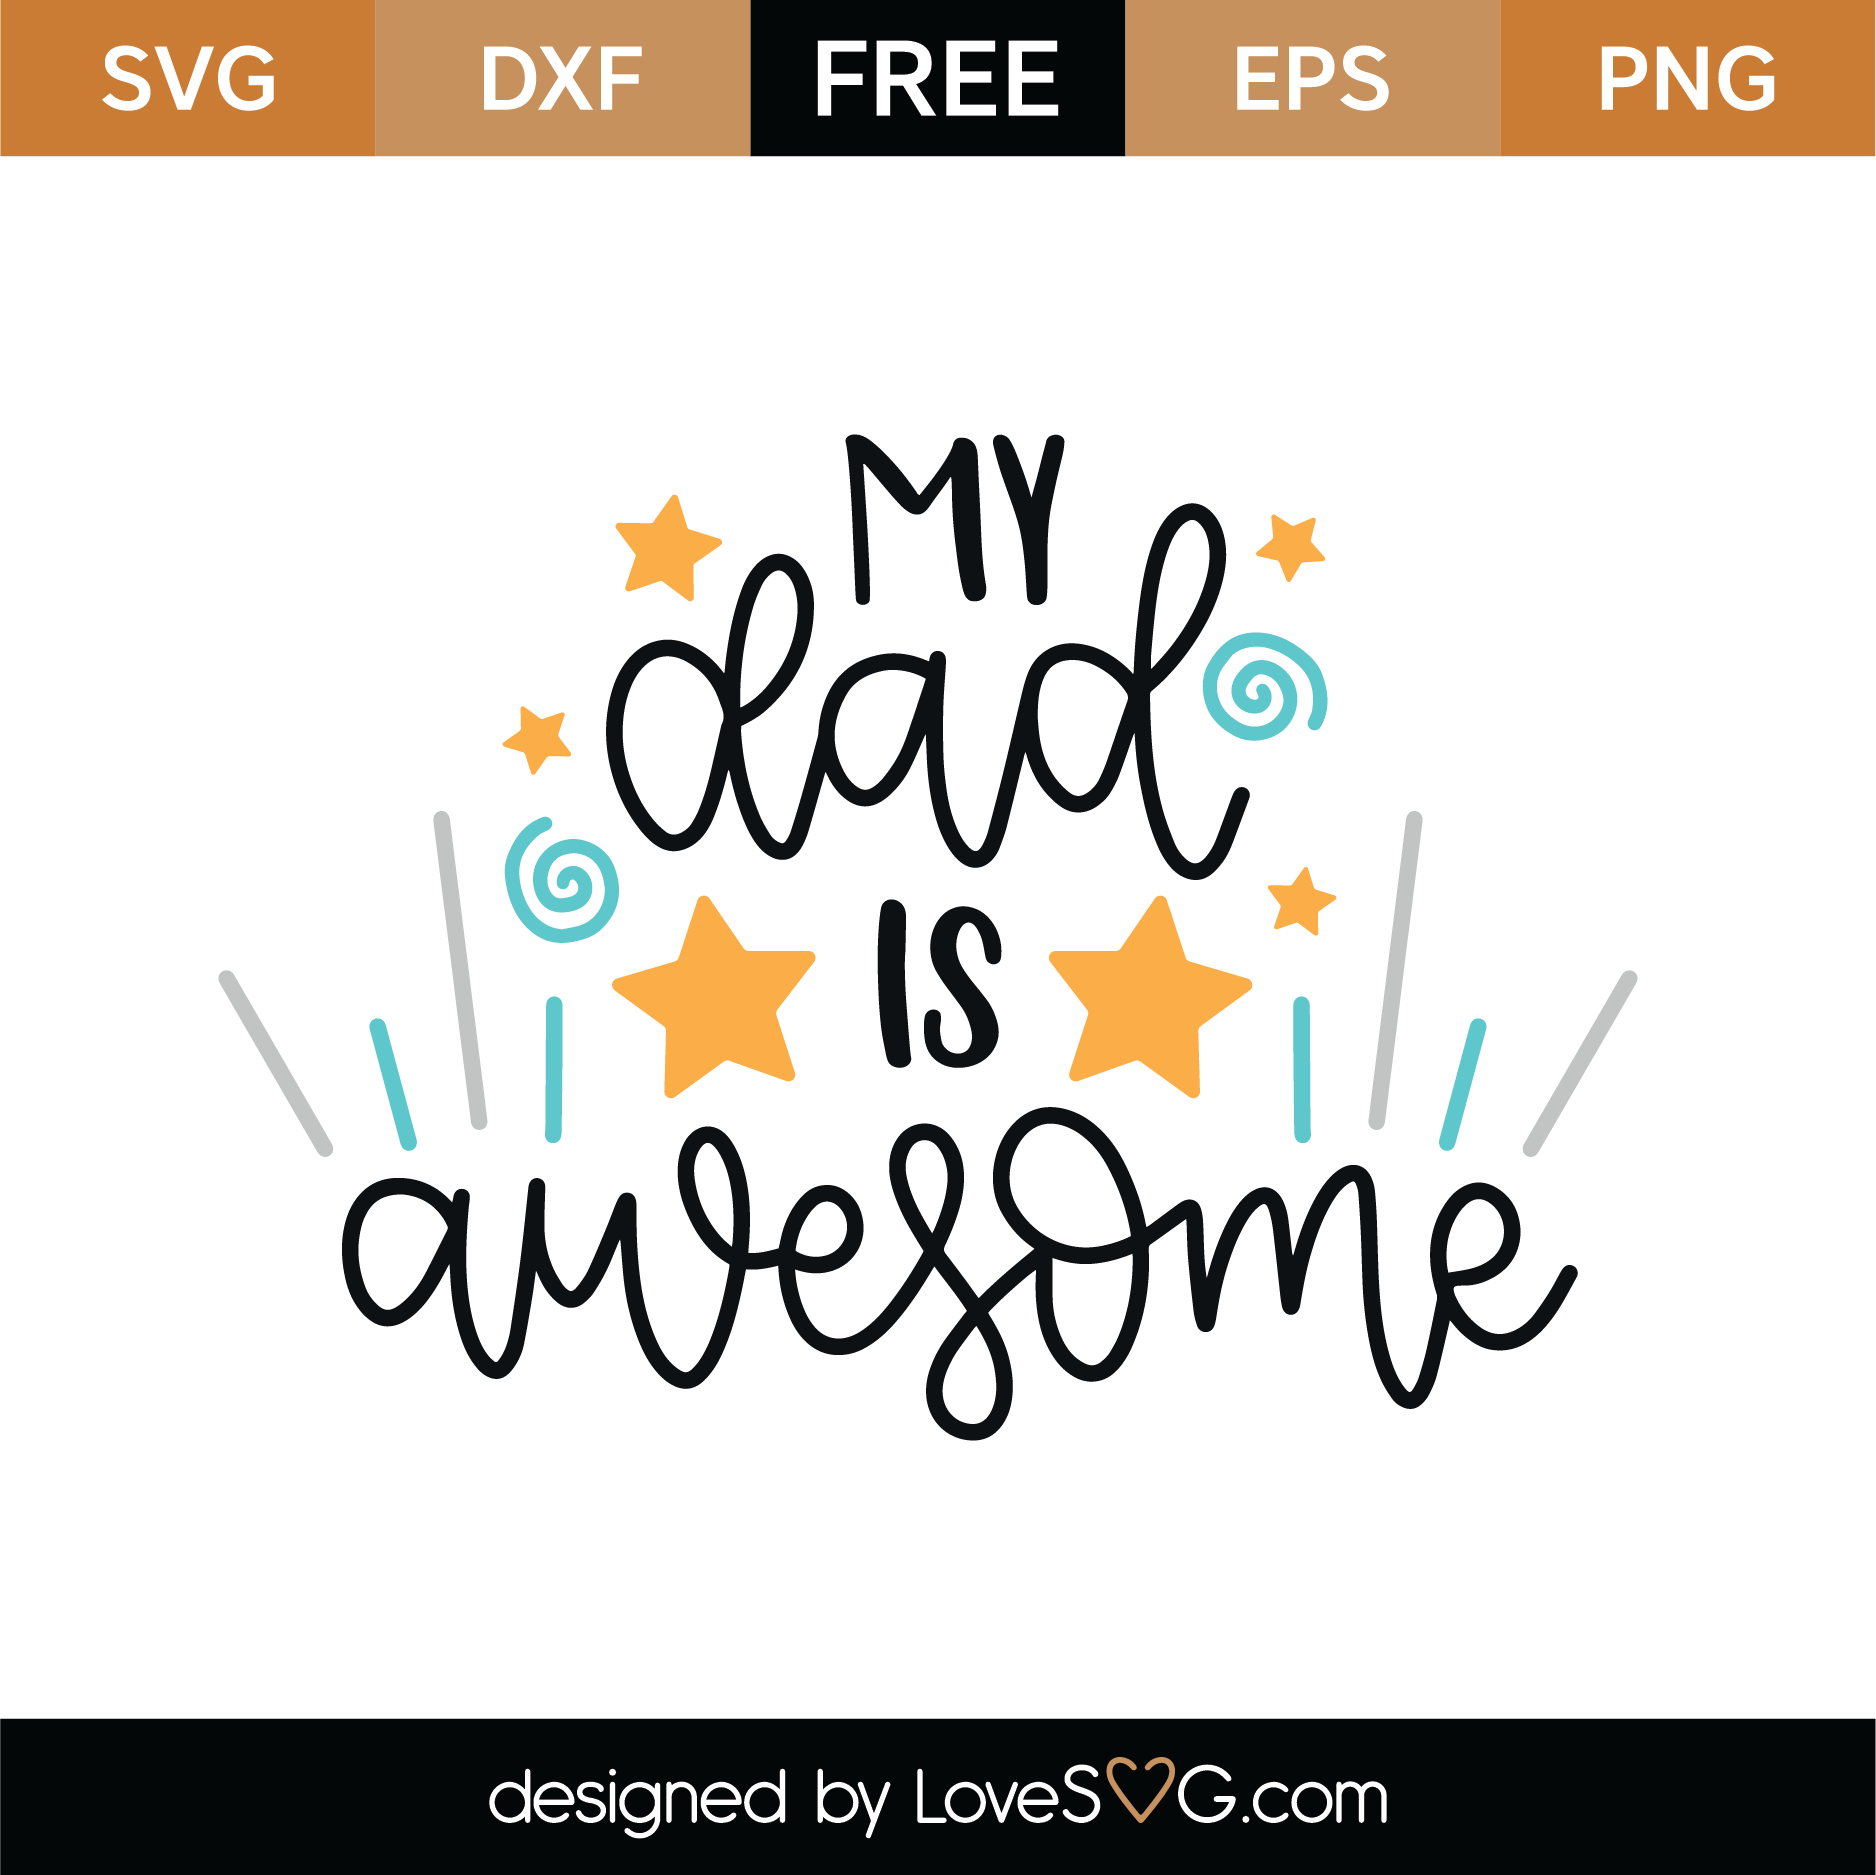 Download Free My Dad Is Awesome SVG Cut File | Lovesvg.com